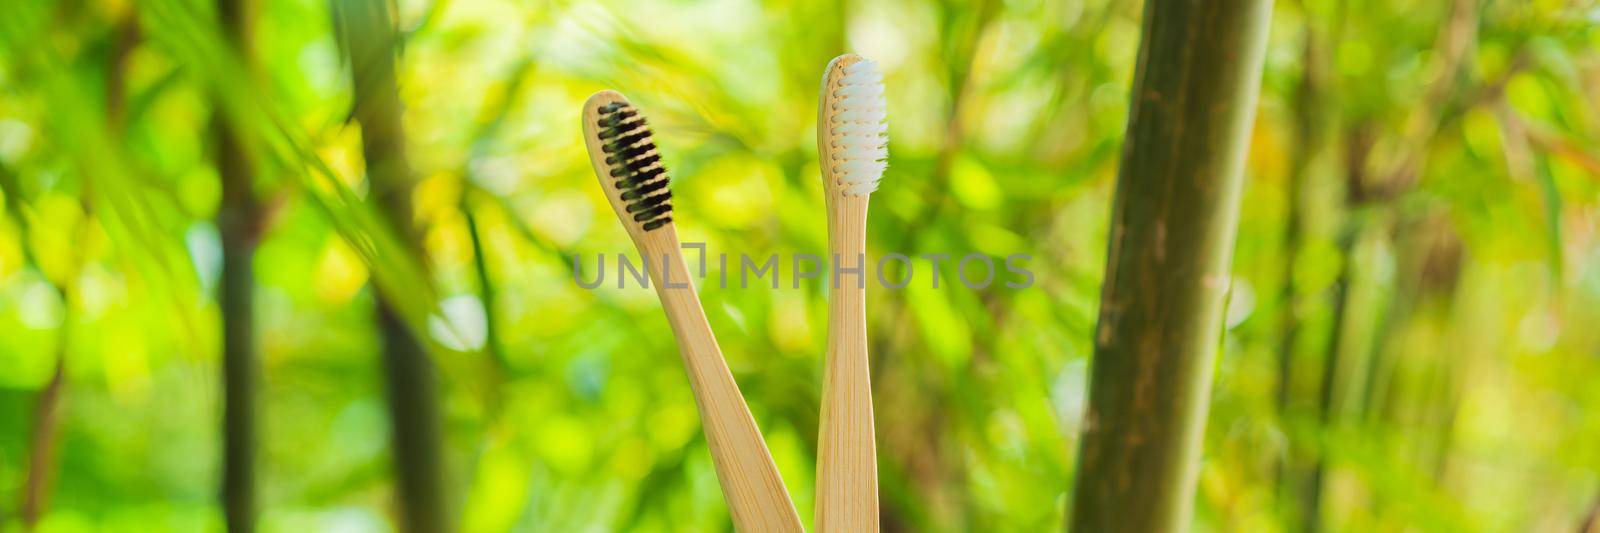 Bamboo toothbrush on a background of green growing bamboo BANNER, LONG FORMAT by galitskaya